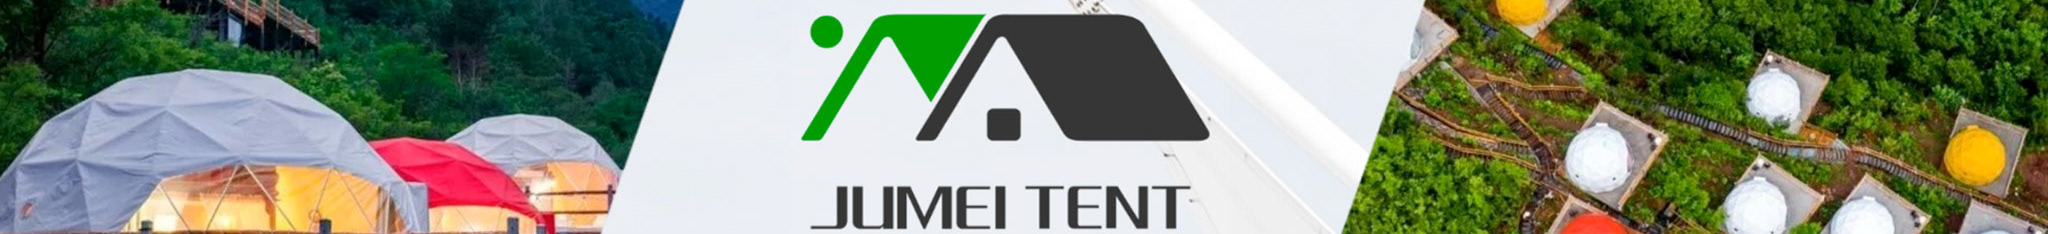 Jumei Tent's profile banner